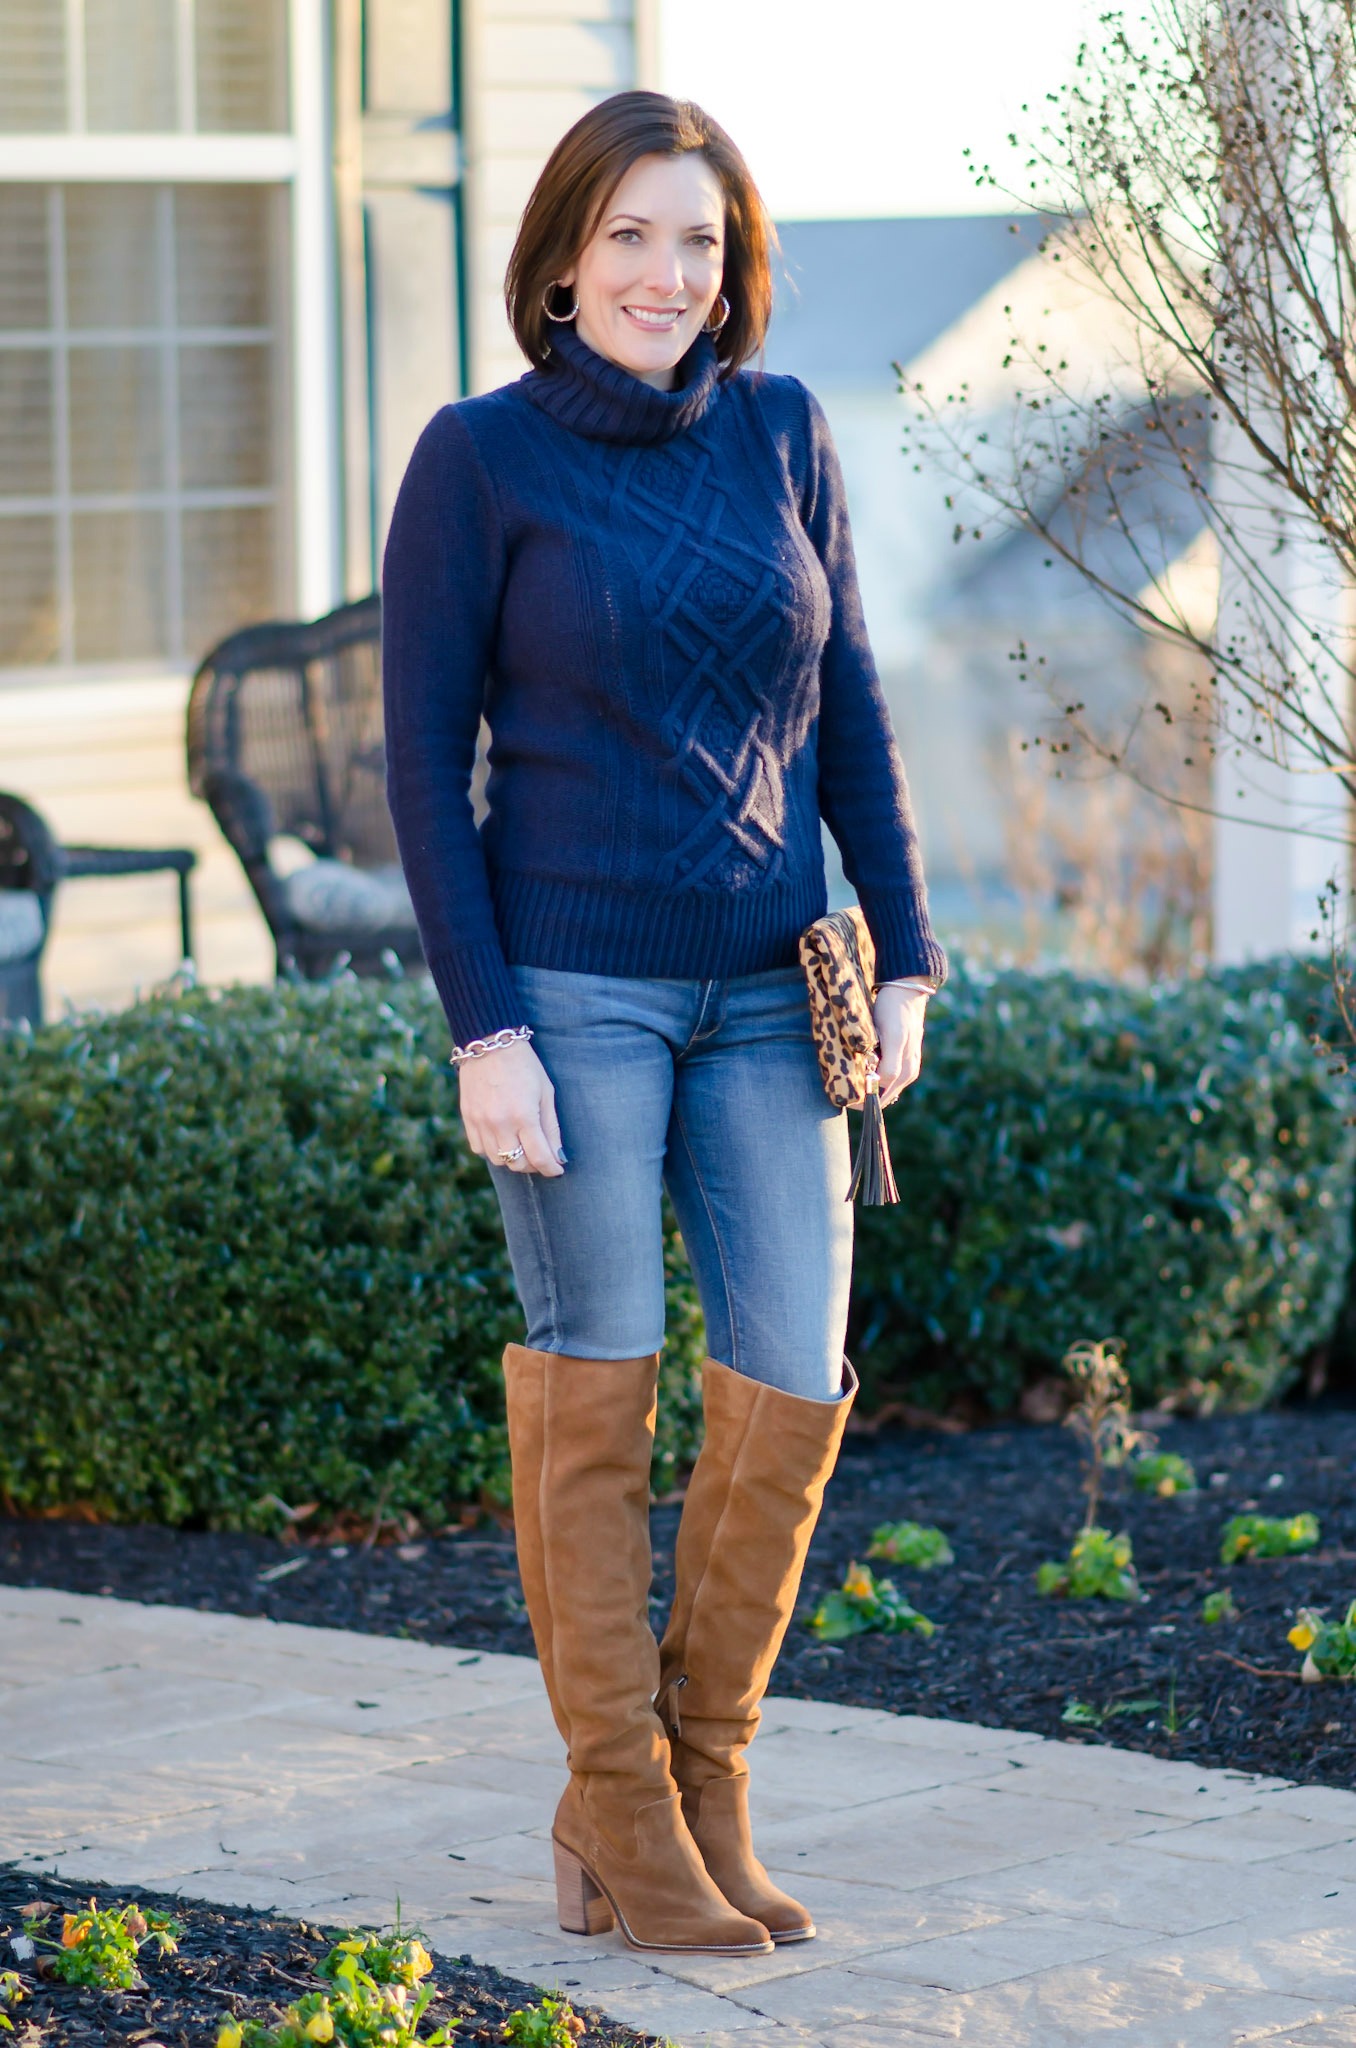 Wearable Winter Outfit Ideas For Women Over 40: Navy Turtleneck with Chestnut OTK Boots